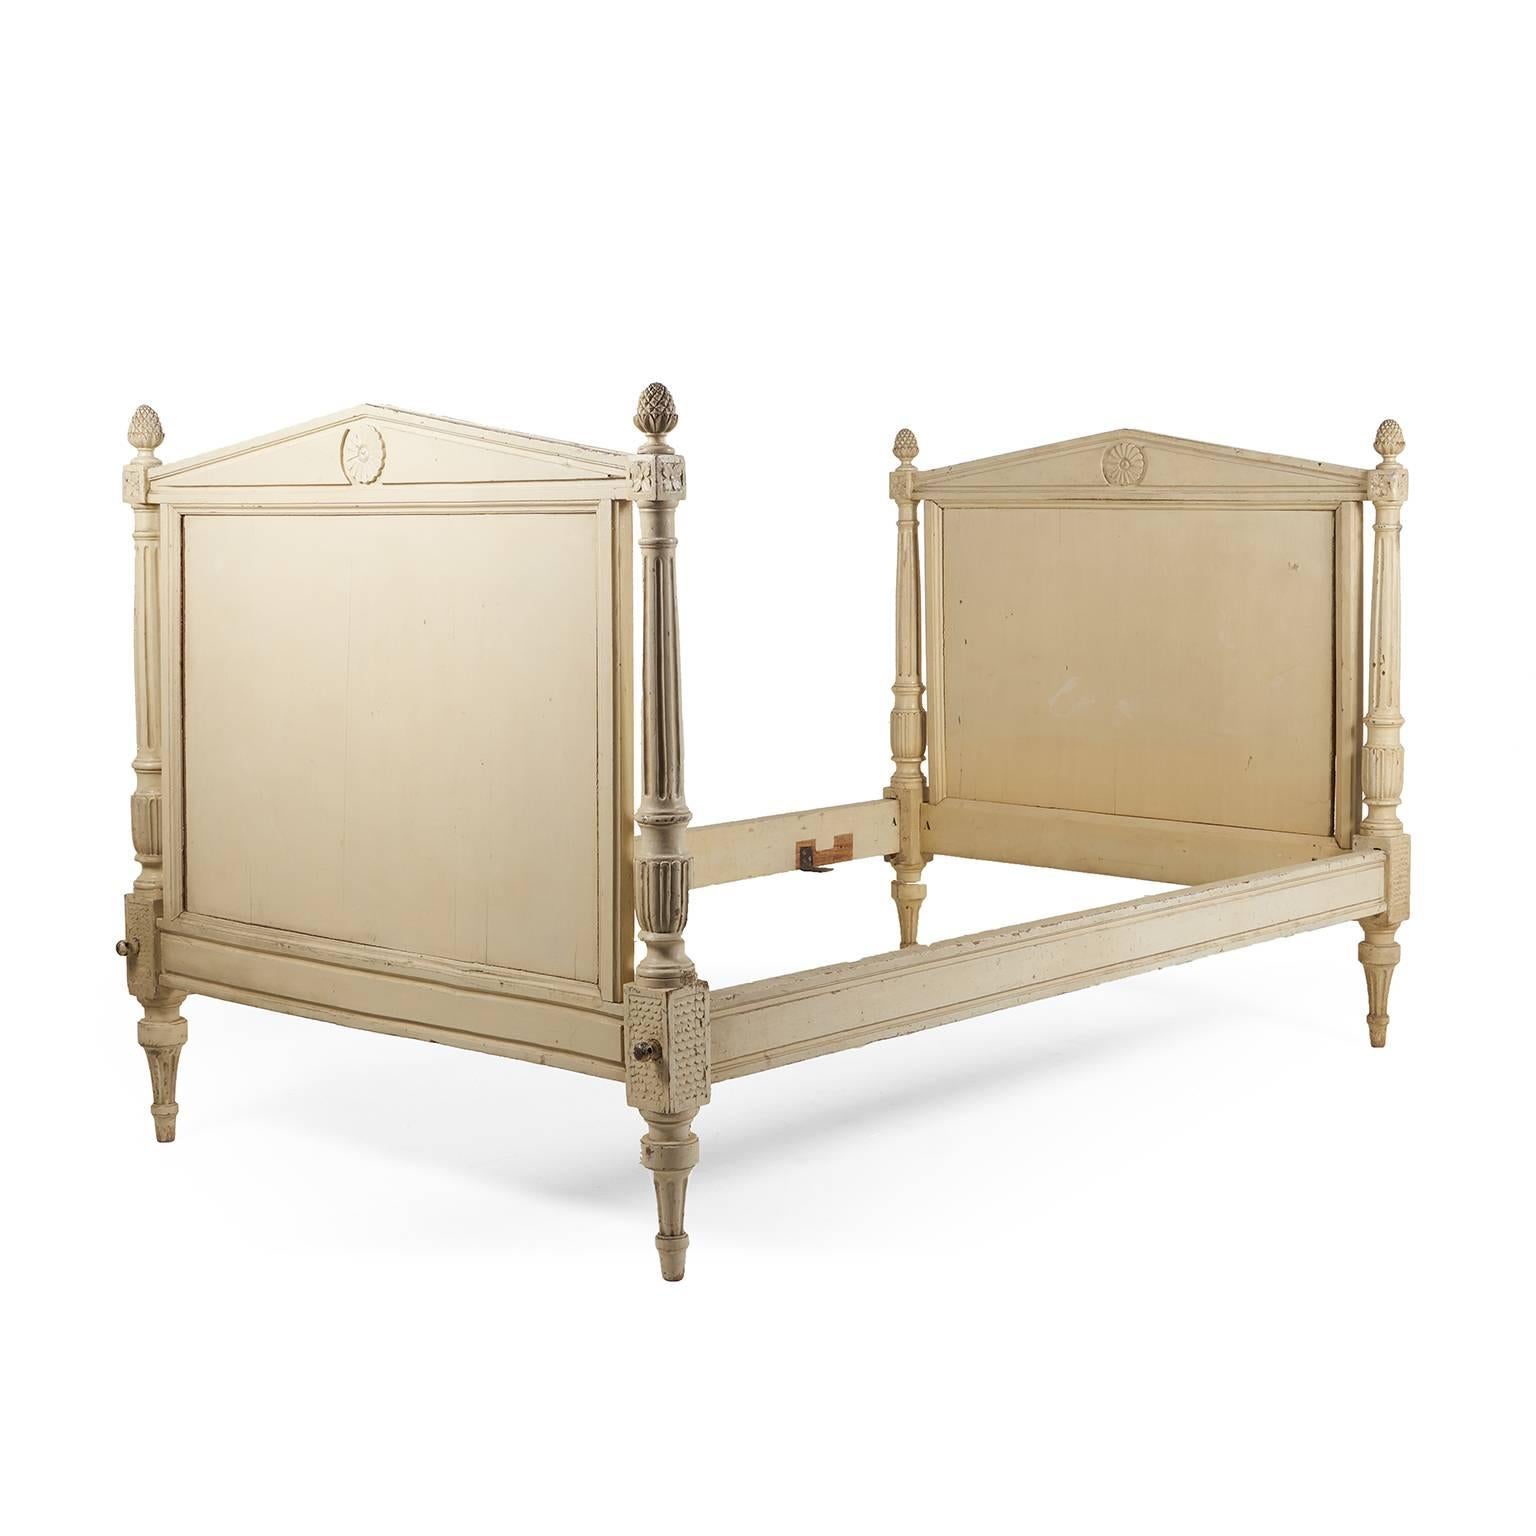 Original paint on this Directoire period daybed from Paris. Lovely detail, very sturdy and usable.

Outside measurements – 74″ Long x 44″ Wide x 42″ Tall. 
Mattress size requirement 40.5″ x 67.5″.